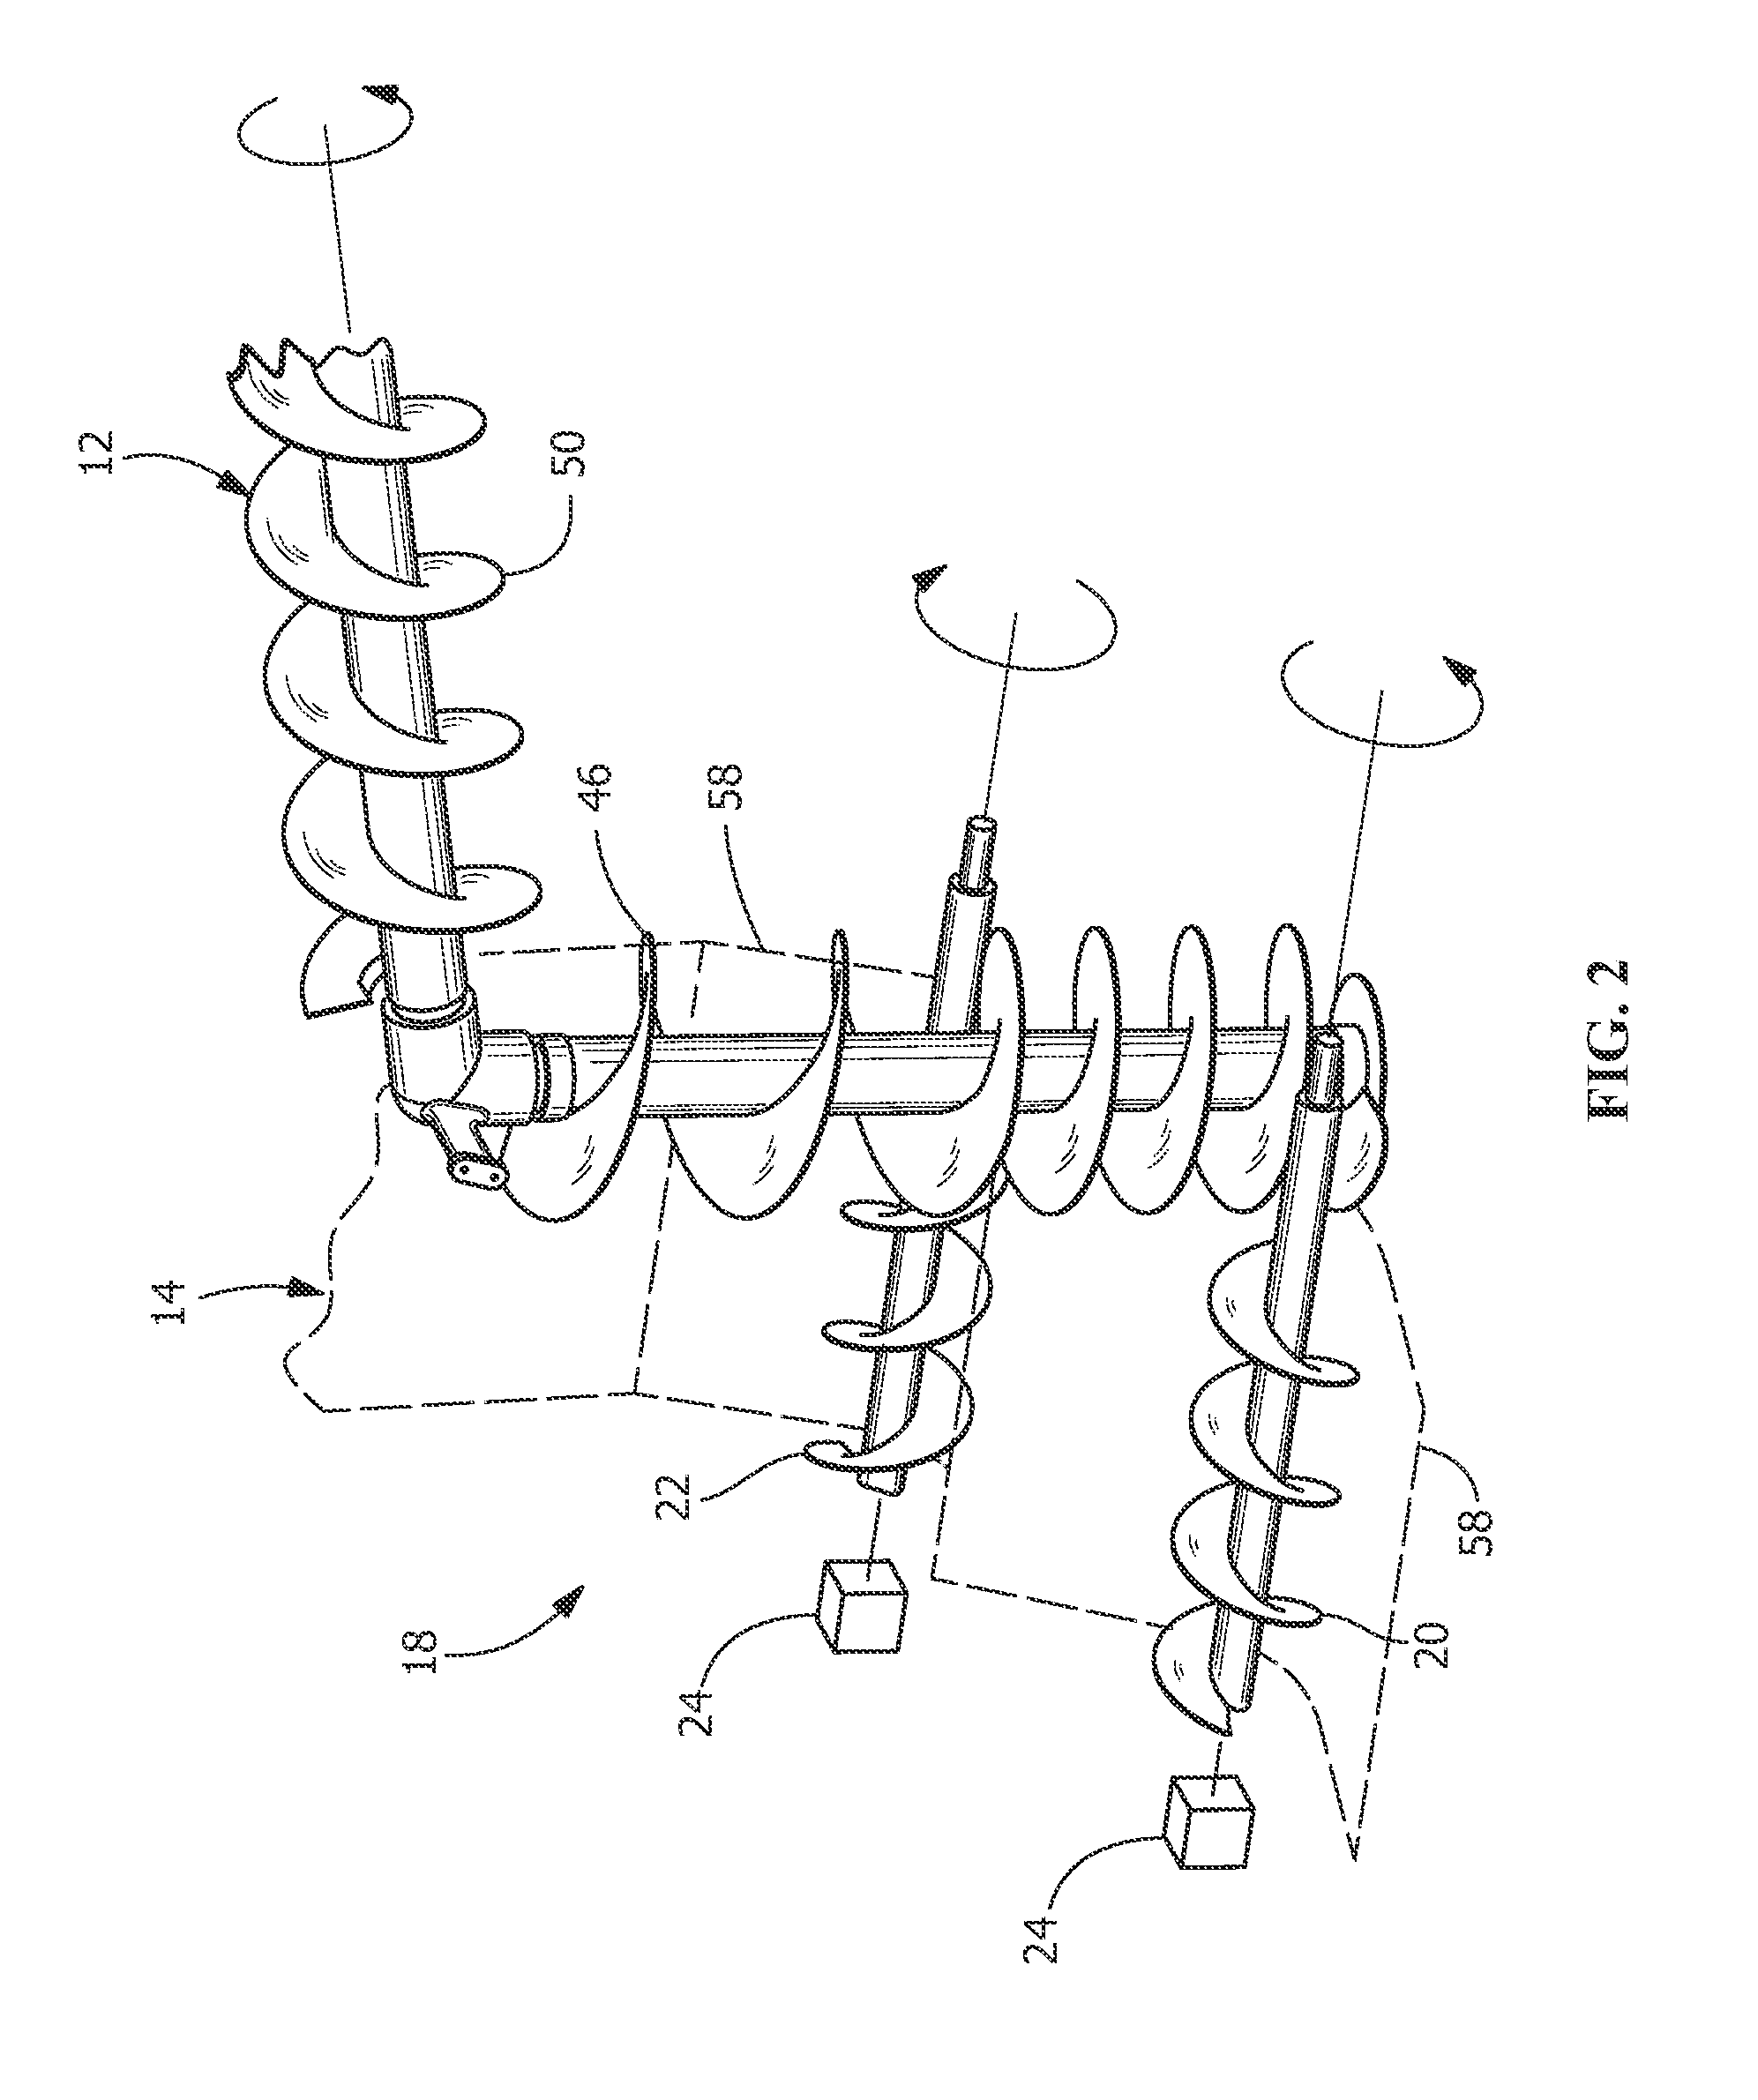 Method of controlling a conveyance rate of grain of an unloader system